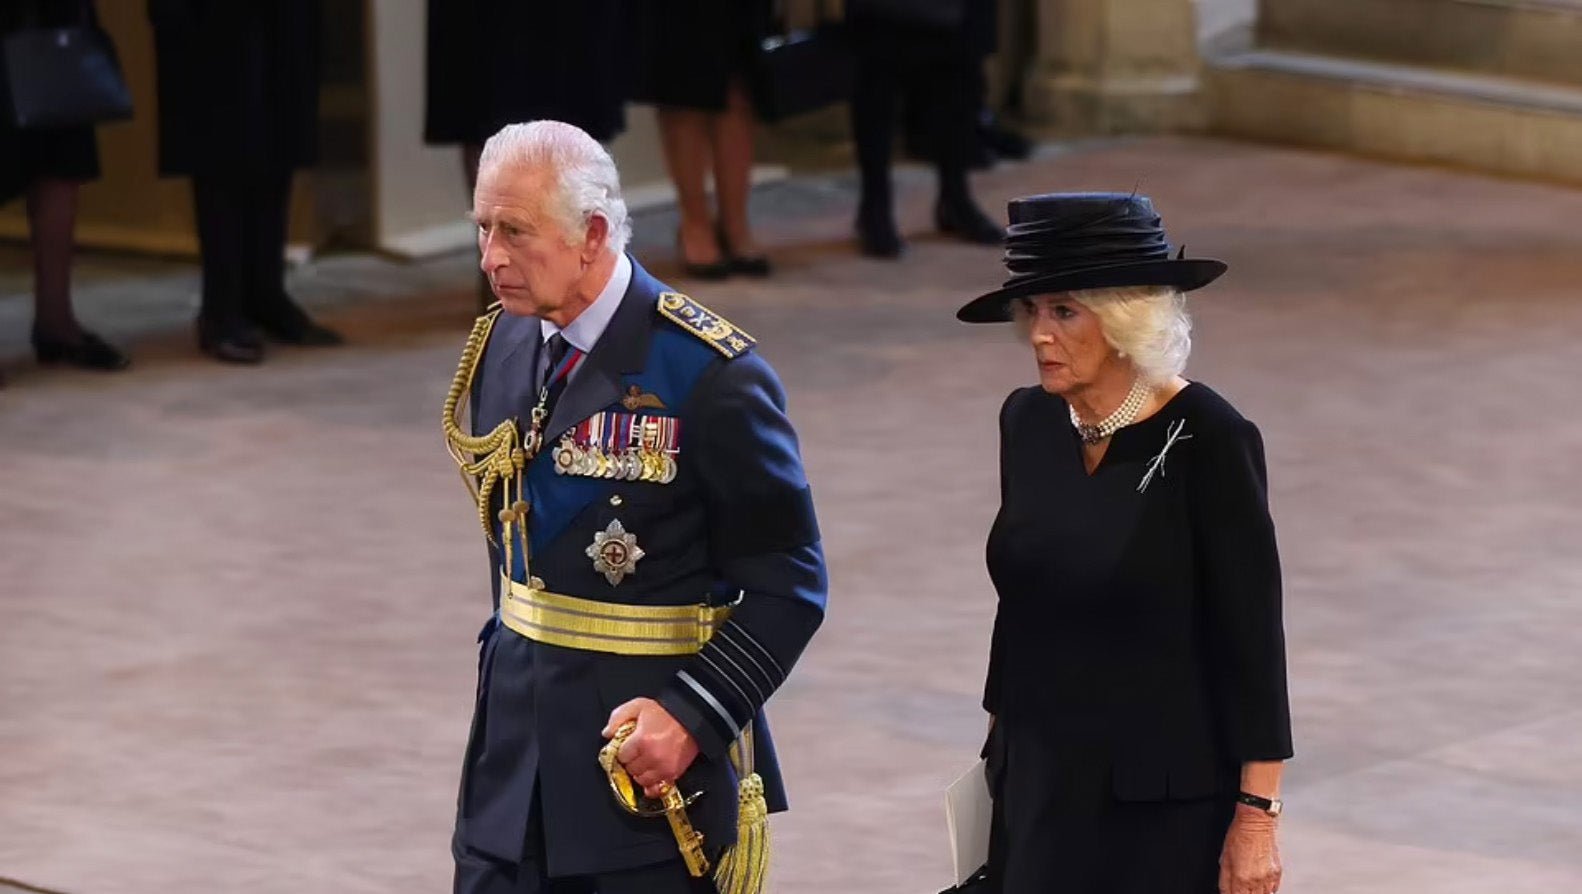 Three Members Of The British Royal Family "Blacklisted" By King Charles III - DSF Antique Jewelry